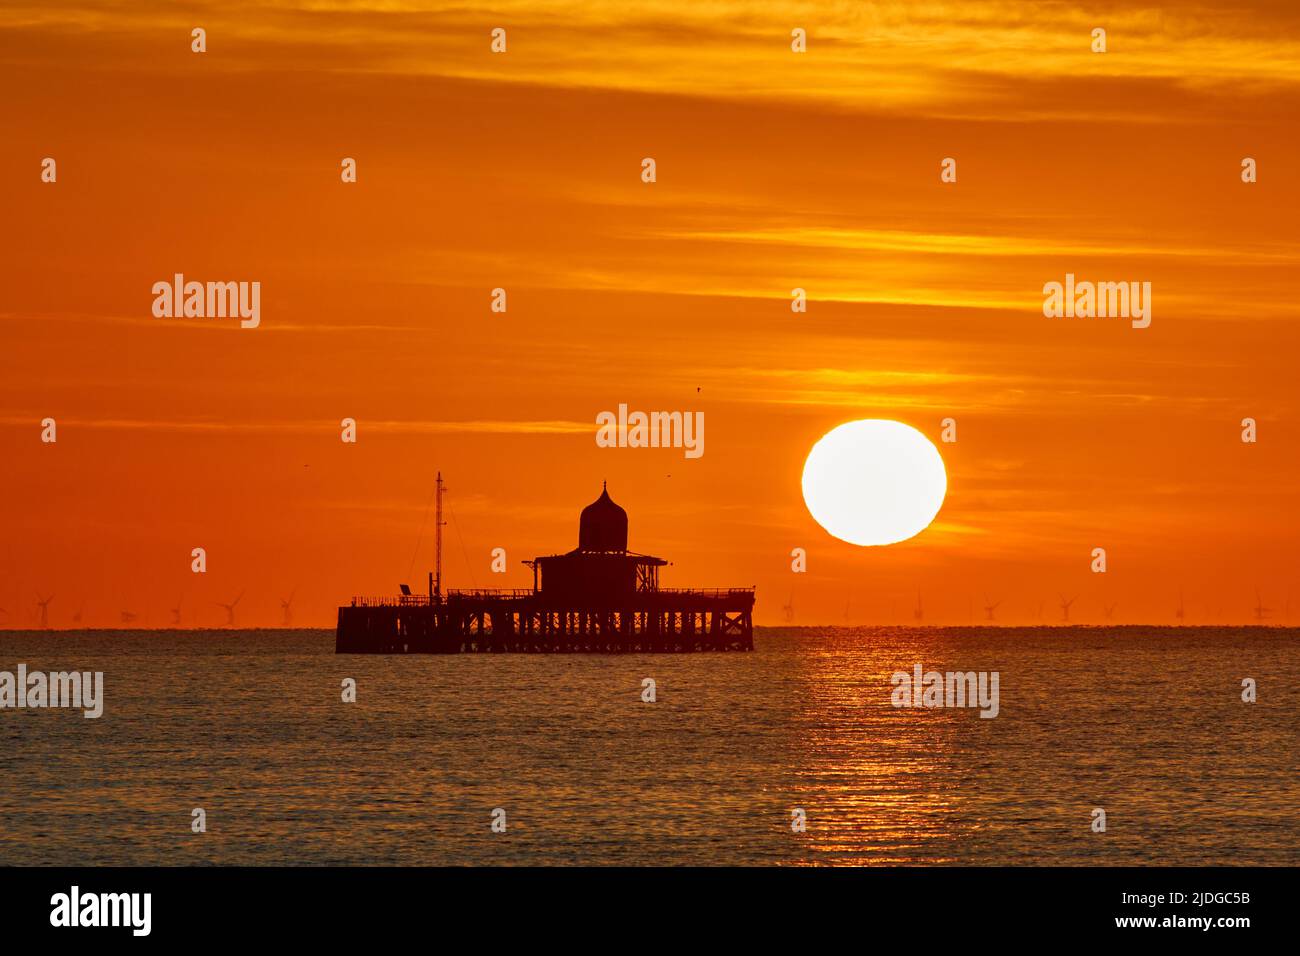 Herne Bay, Kent, UK. 21st June 2022: UK Weather. Sunrise on the summer solstice at Herne Bay in Kent, with the old pier head silhouetted against the morning orange glow as another bright sunny and warm day starts. Credit: Alan Payton/Alamy Live News Stock Photo